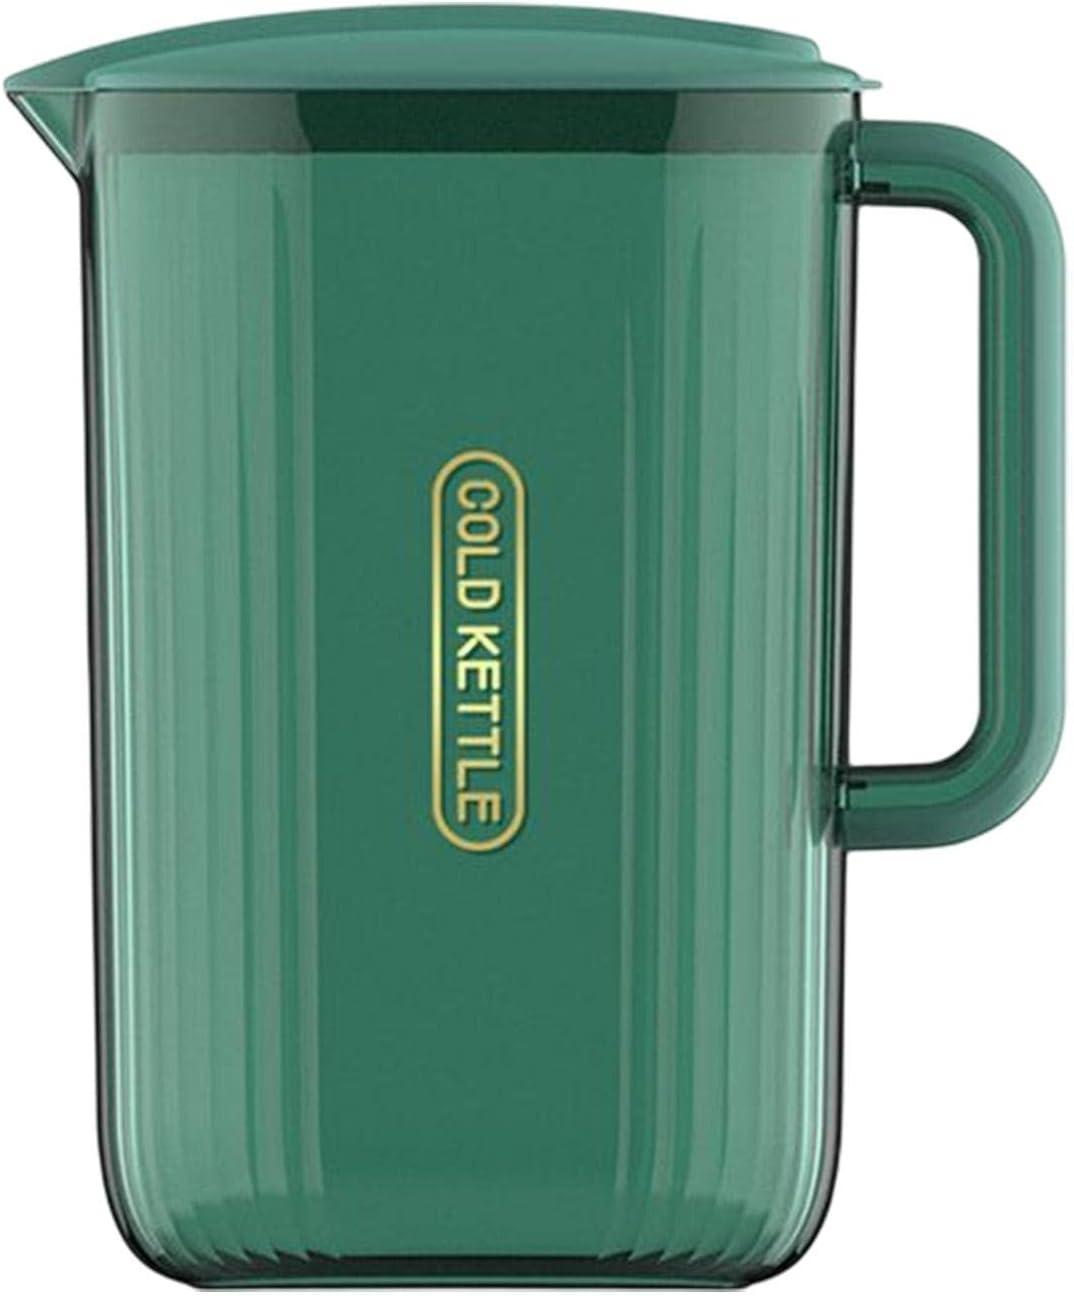 ＫＬＫＣＭＳ Iced Tea Pitcher Hot or Cold Water Pitcher,Heat Resistant Teapot,Lemon Kettle,Water Pitcher for Household Fridge Refrigerator Iced Tea Beer, Green